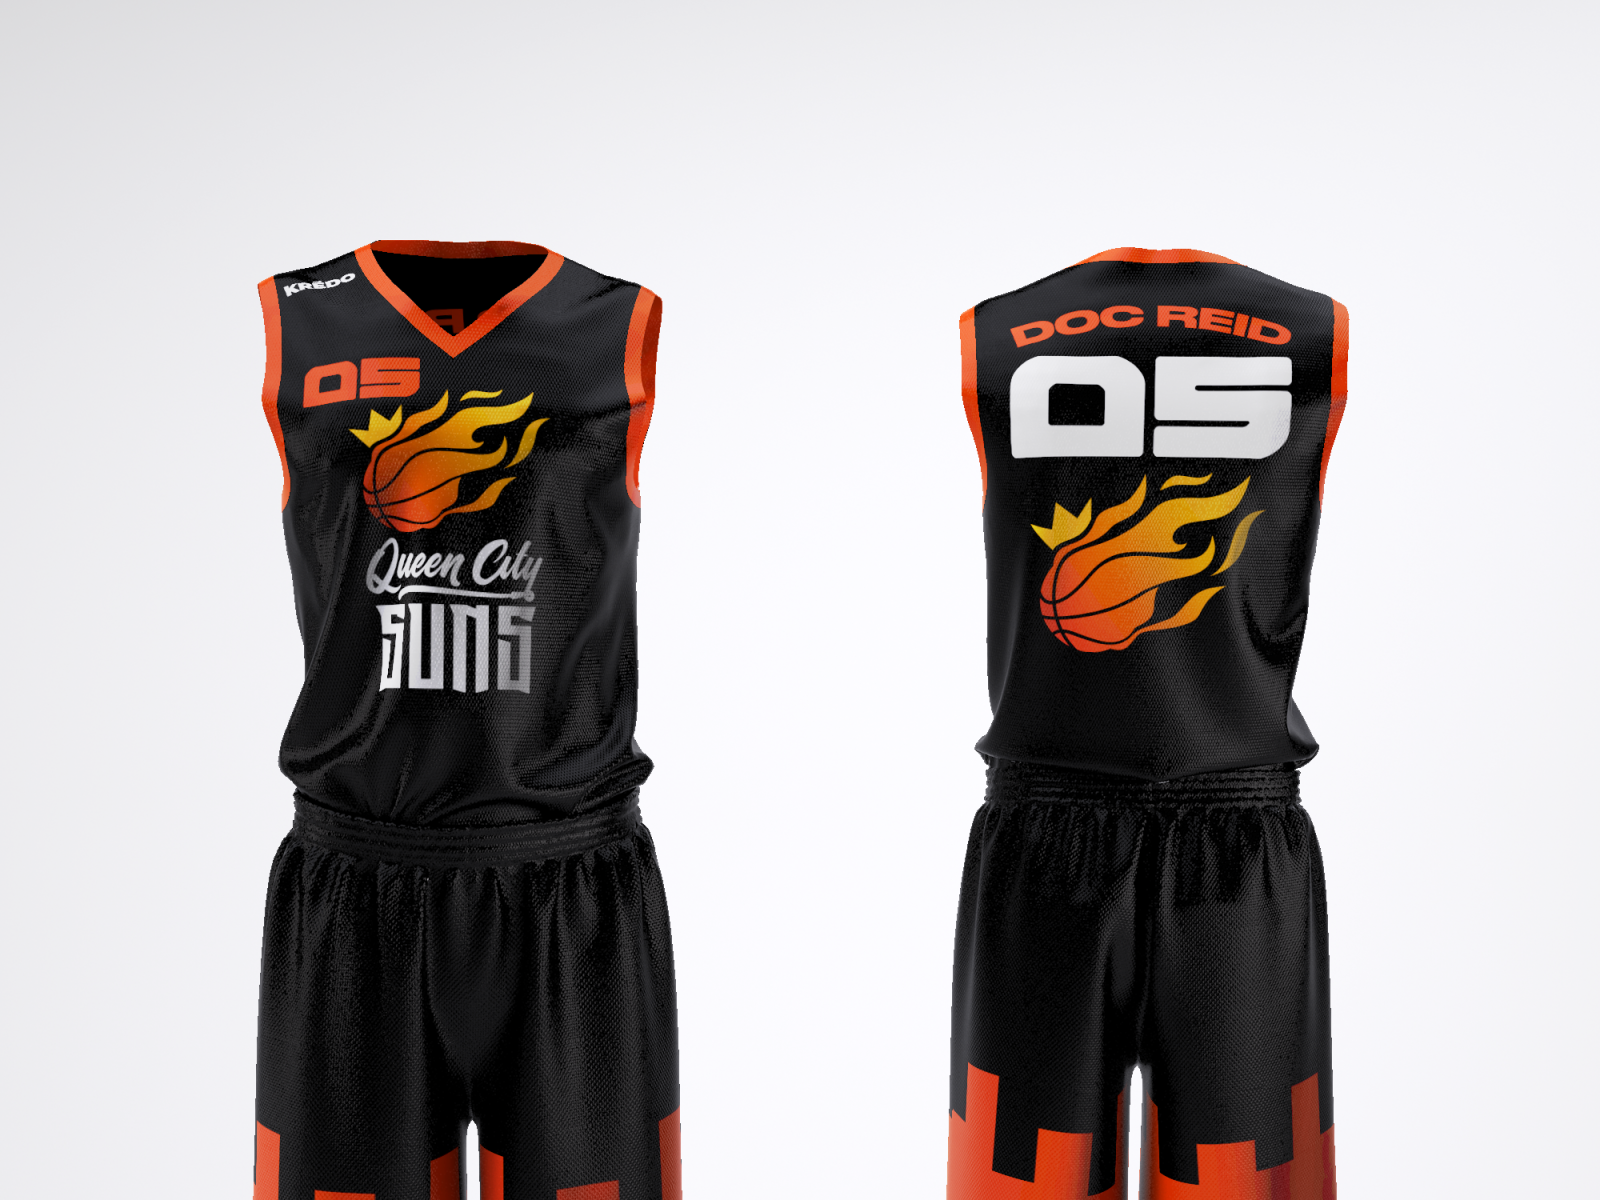 Queen City SUNS Jersey Design (Away version) by John Black on Dribbble